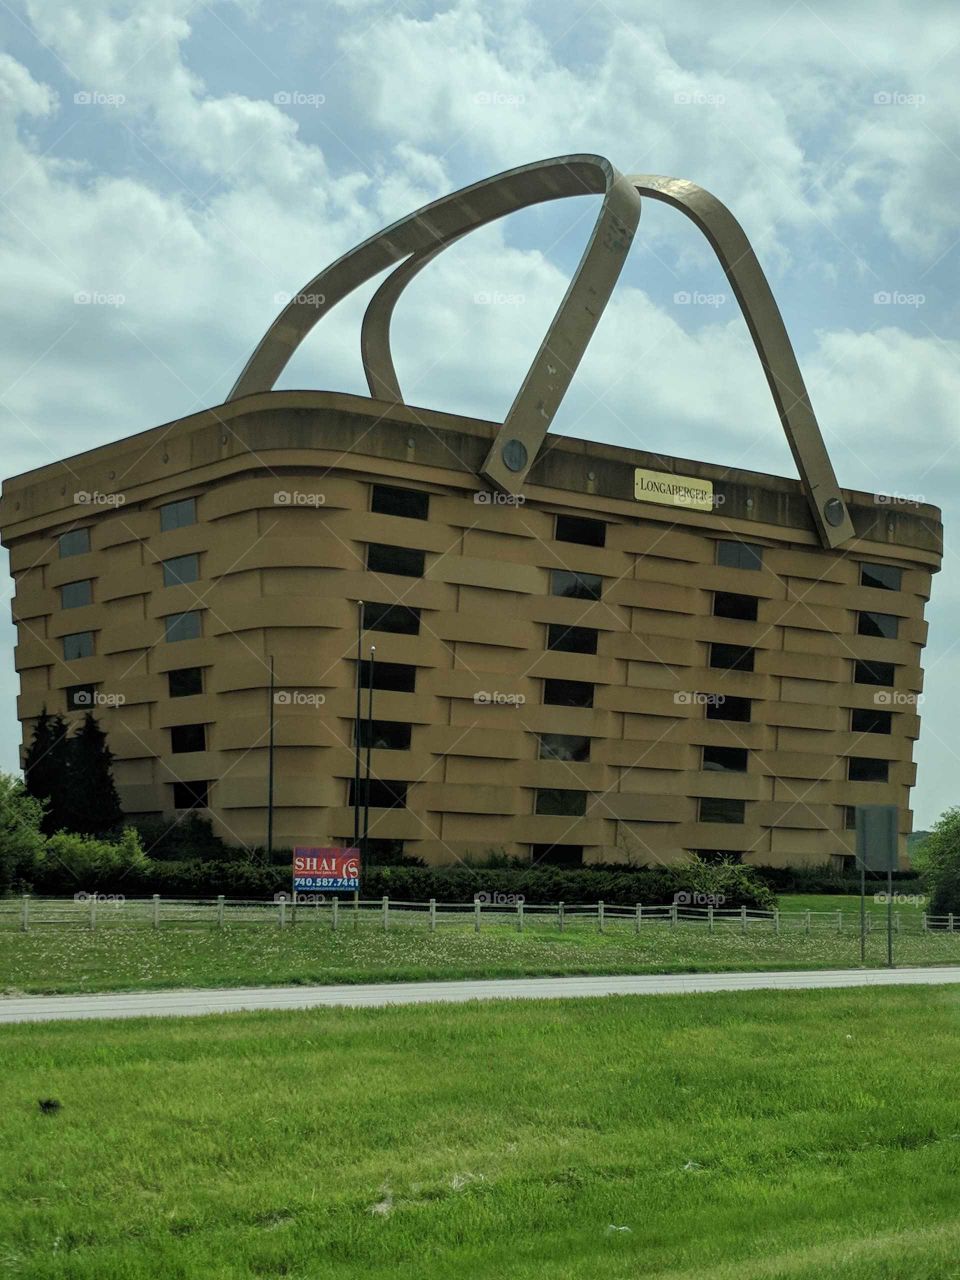 A picture of the Longaberger Basket in Ohio